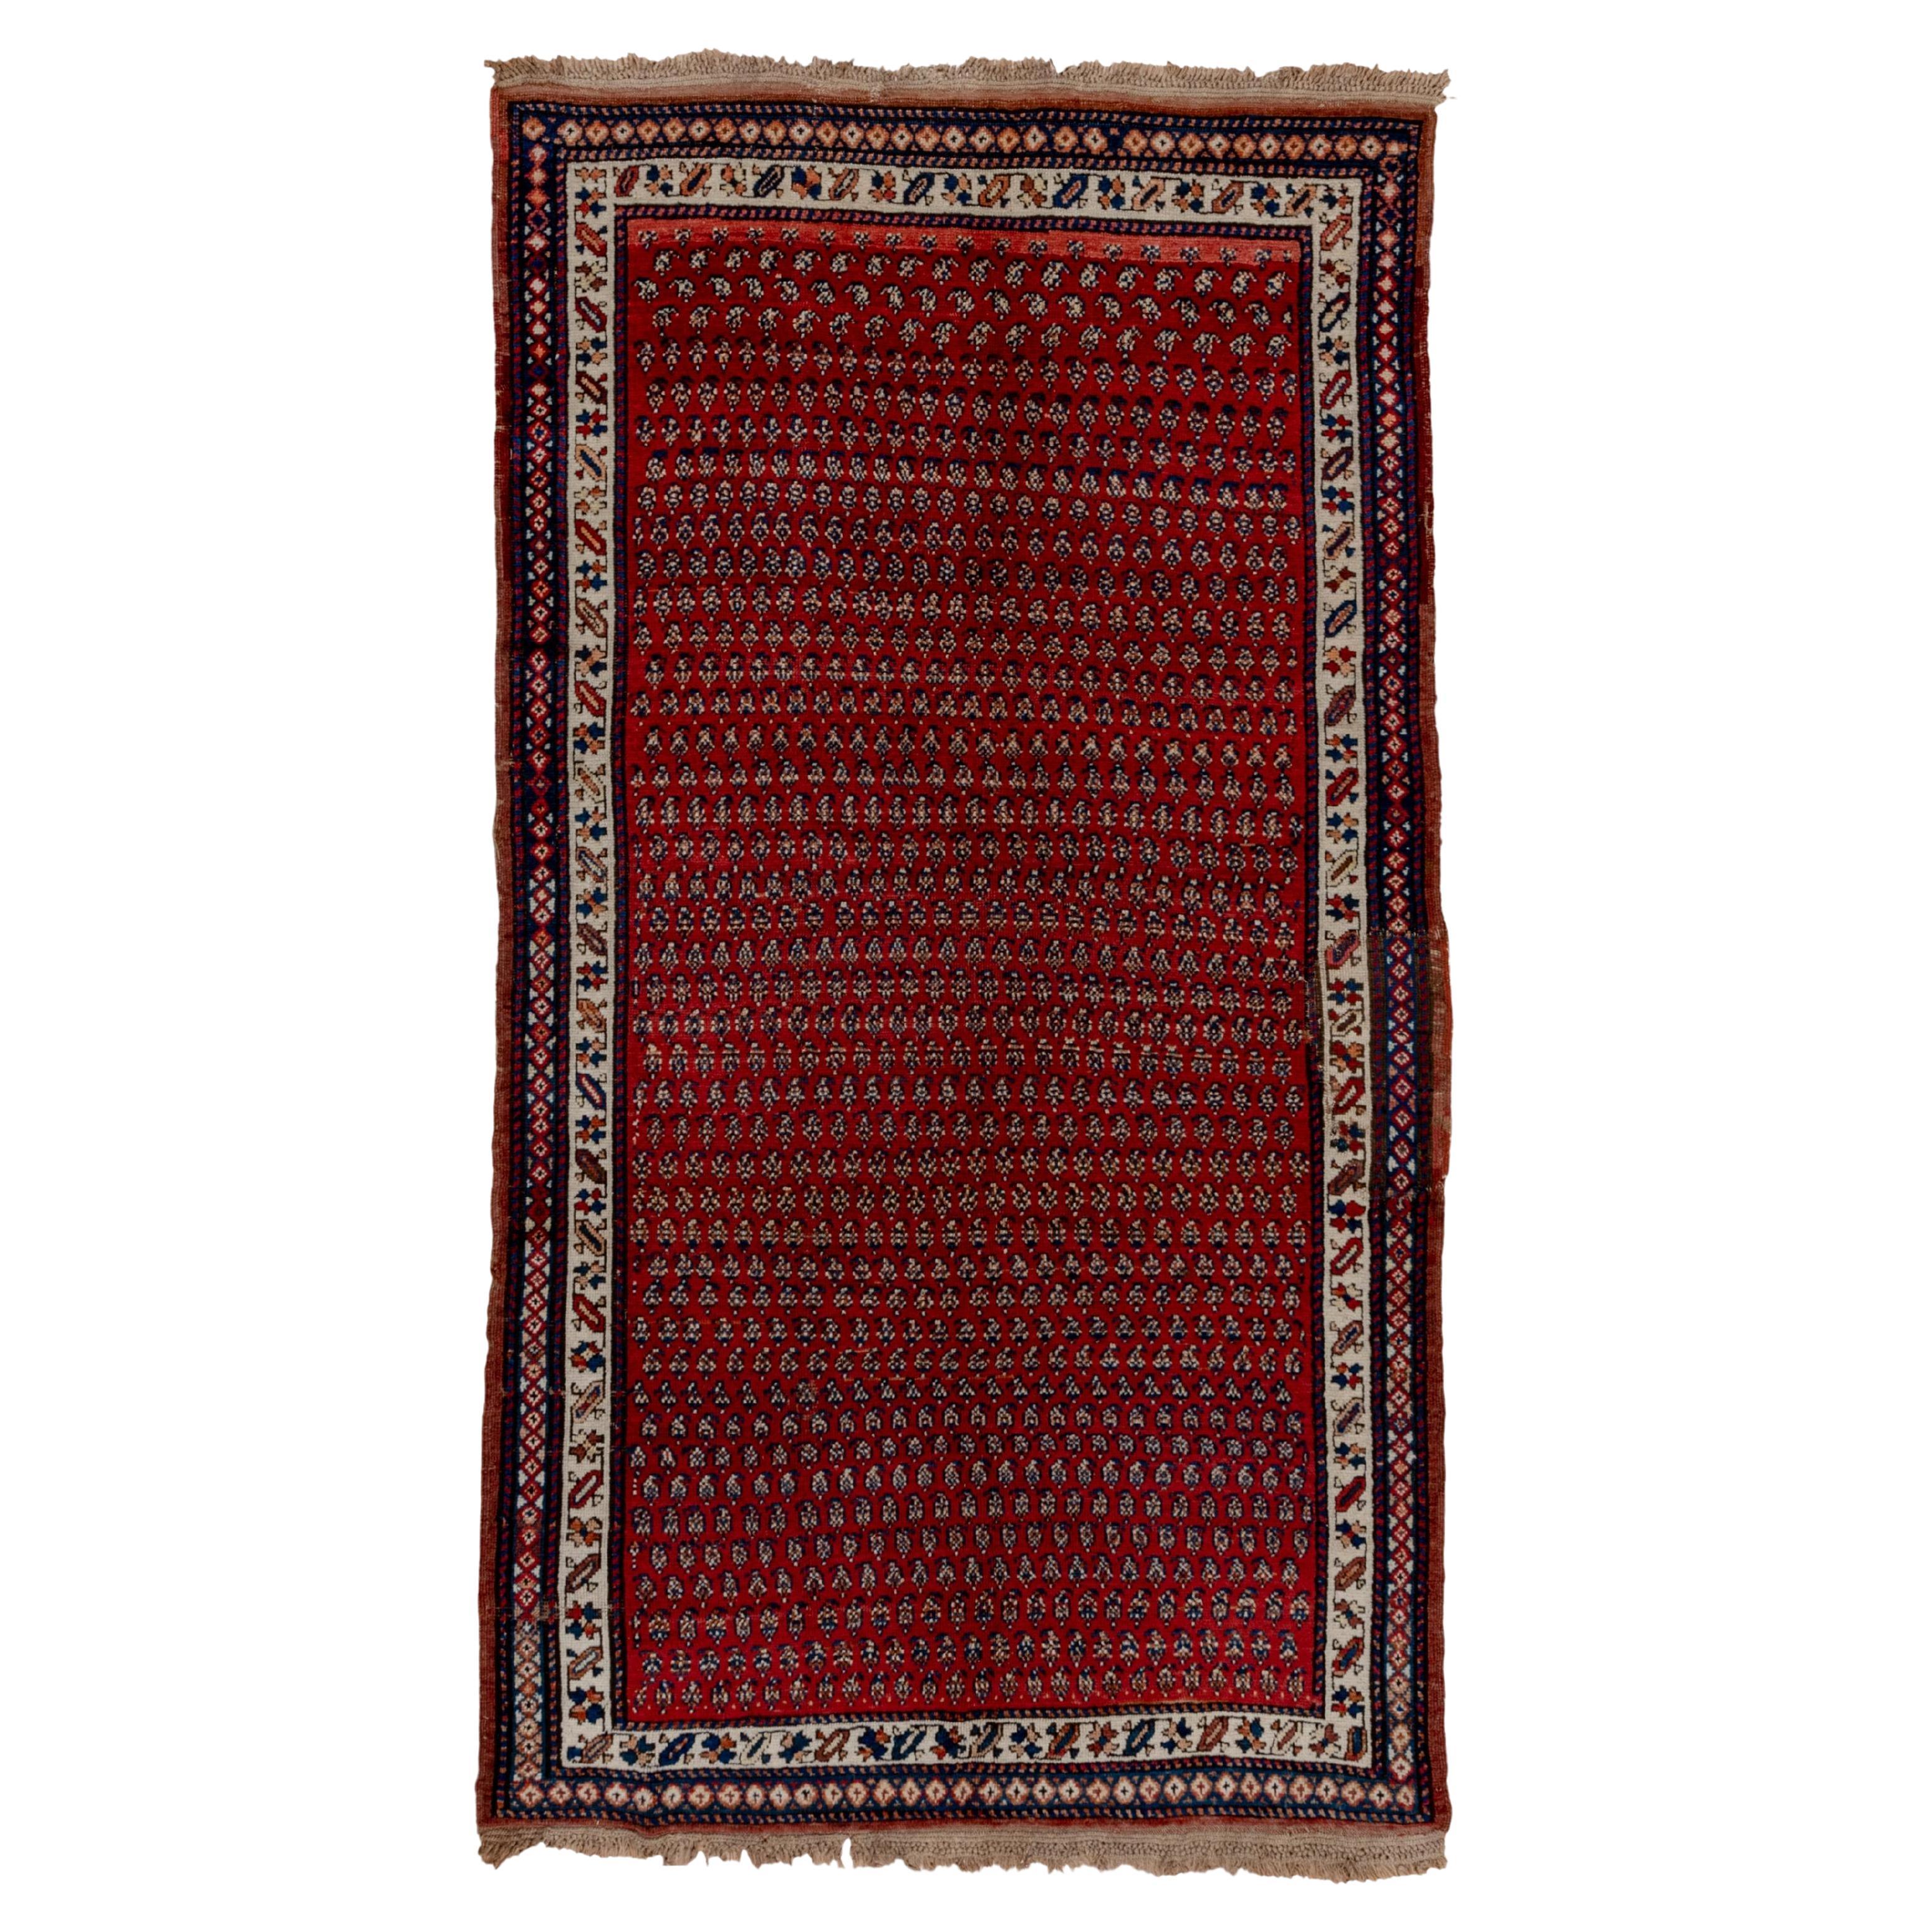 Antique Northwest Persian Runner, Red Paisley Field, High Pile with Fringes